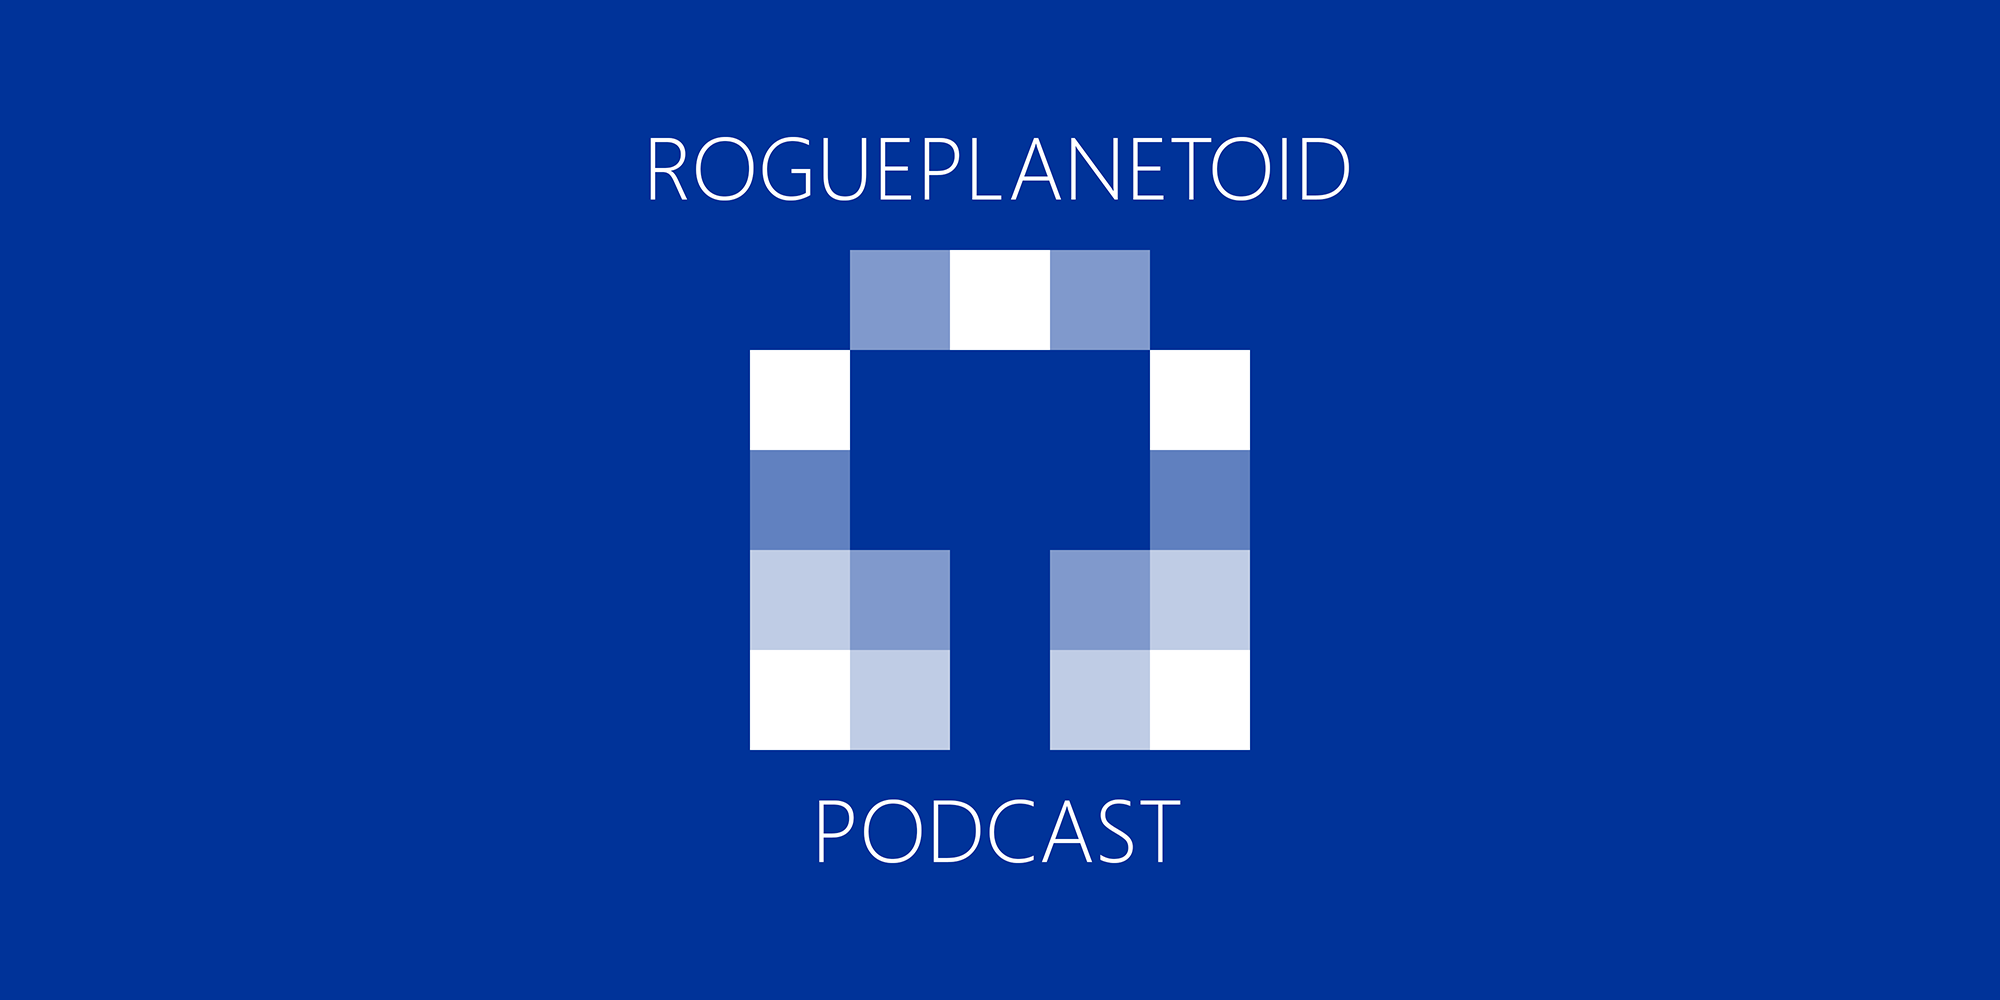 RoguePlanetoid Podcast - Episode Twelve - Overview of 2023